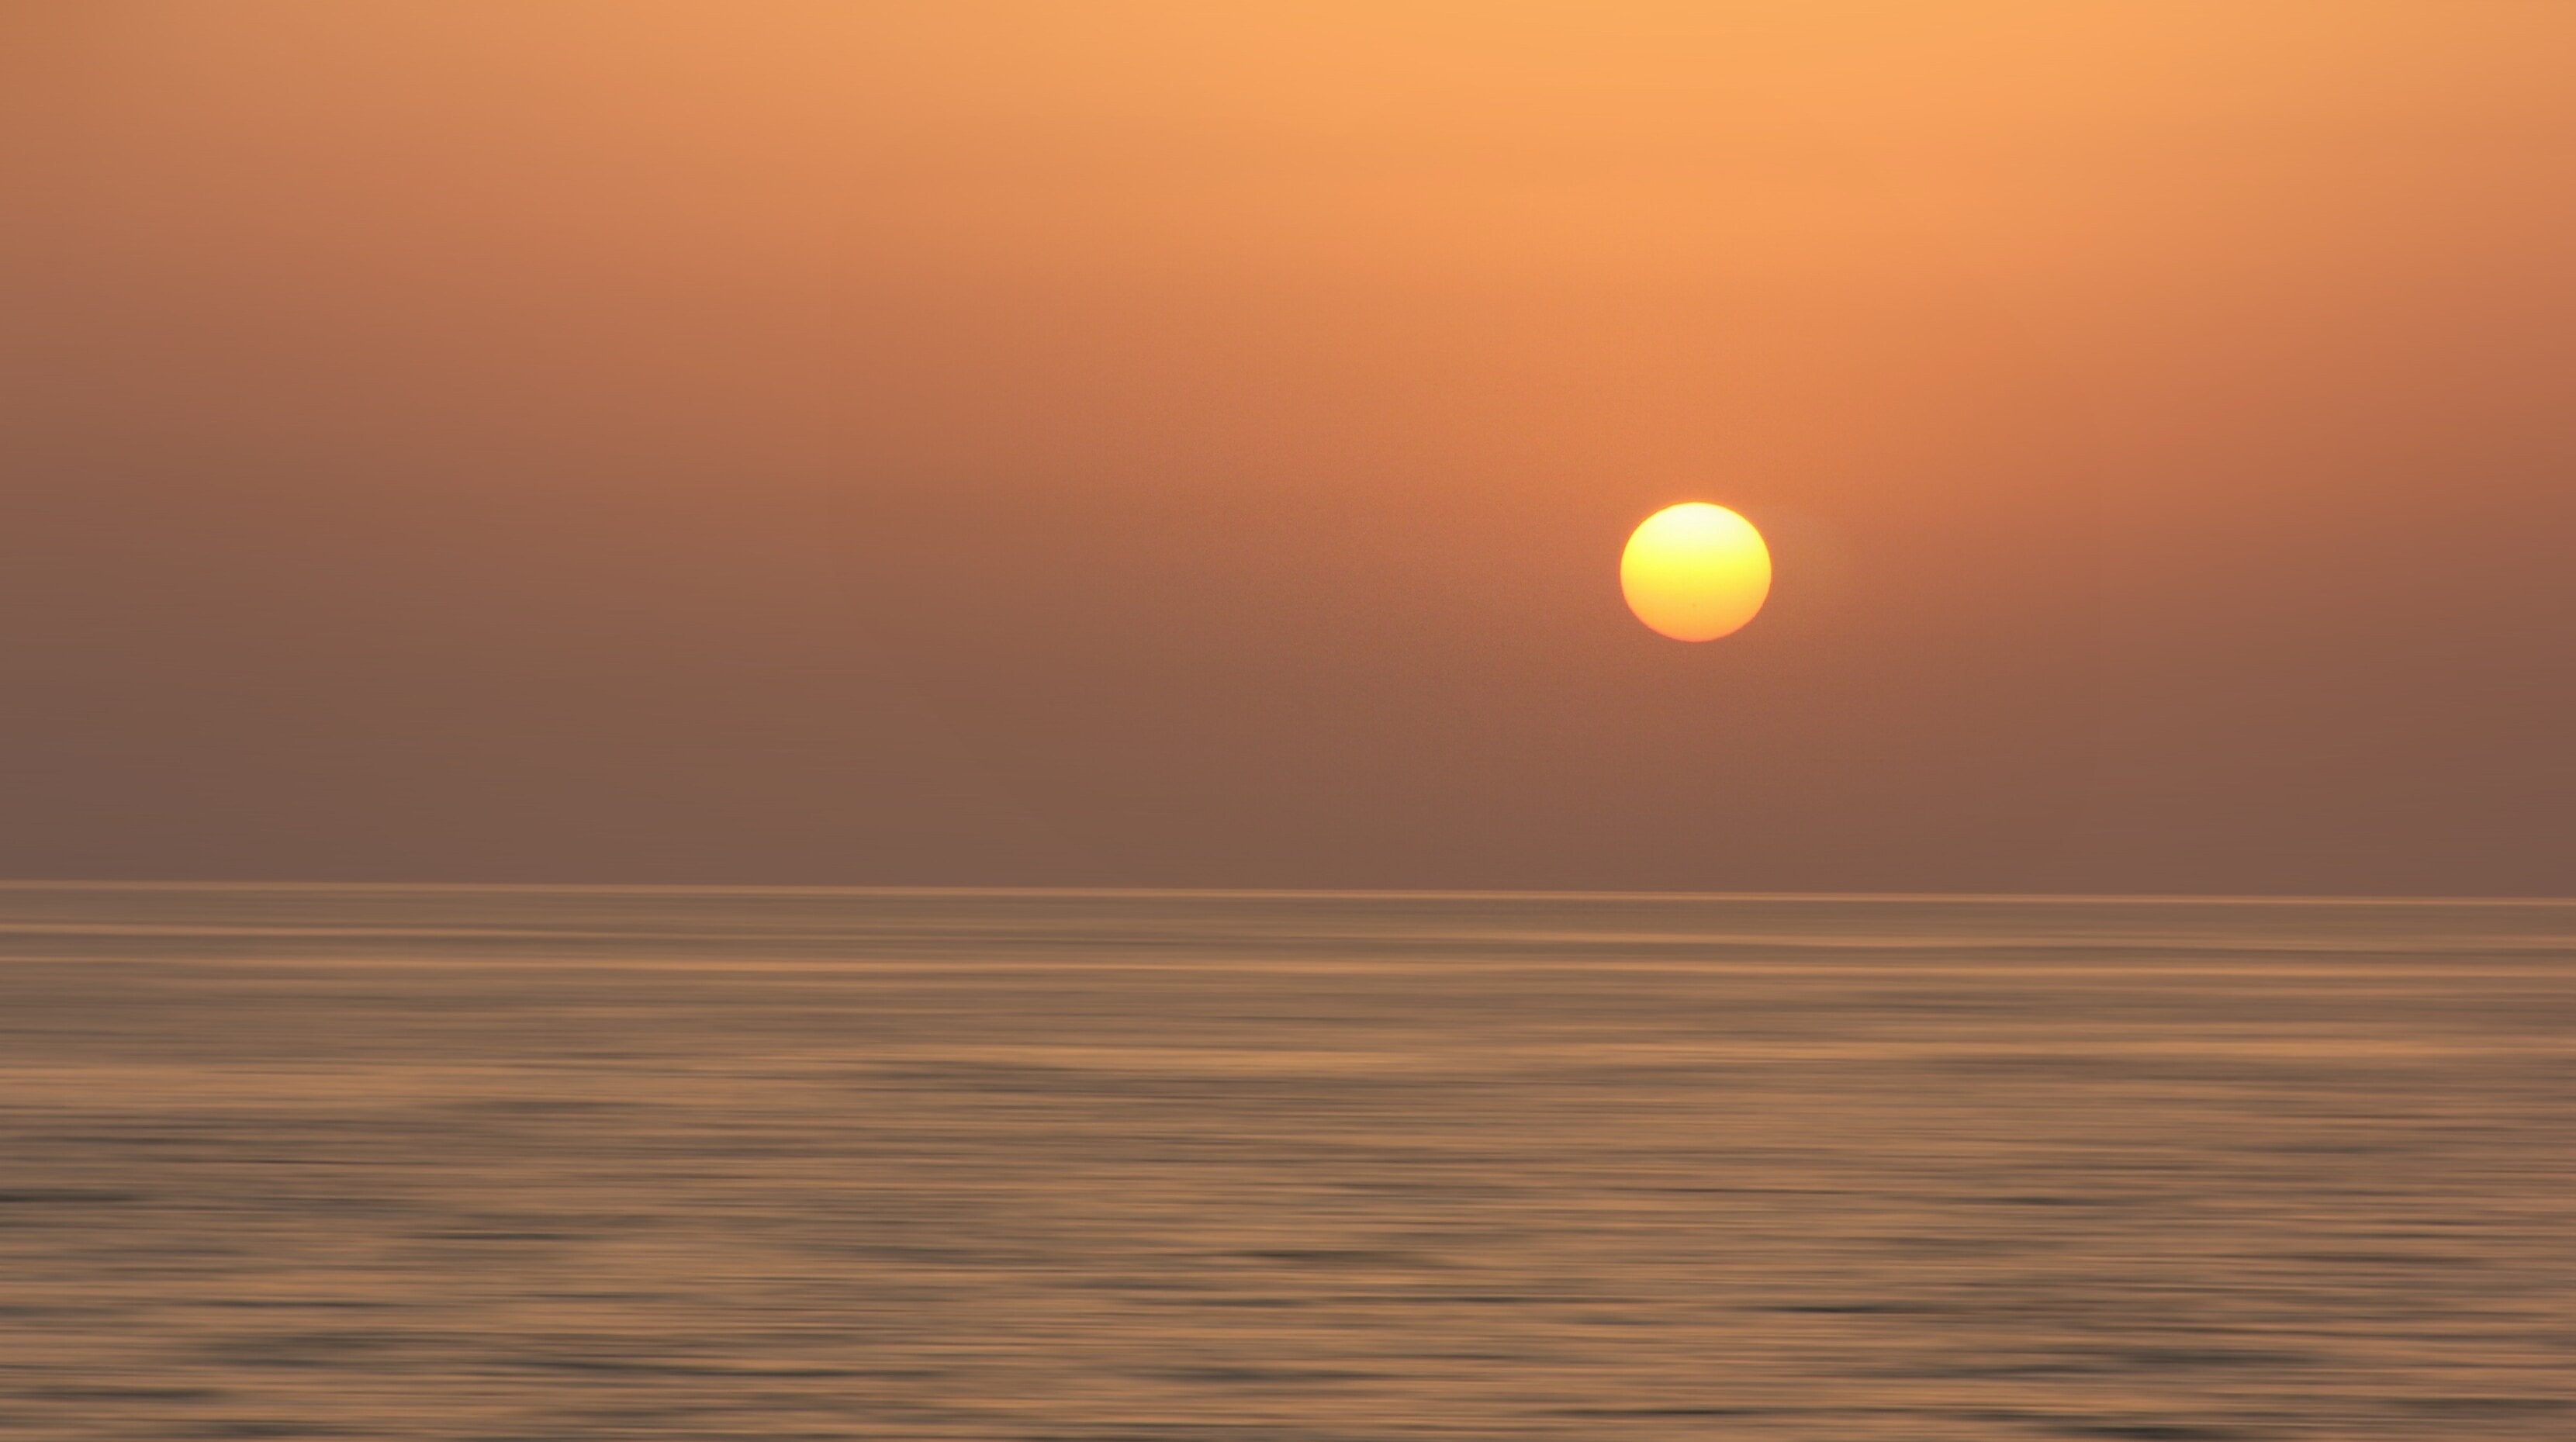 Sunset in the Persian Gulf